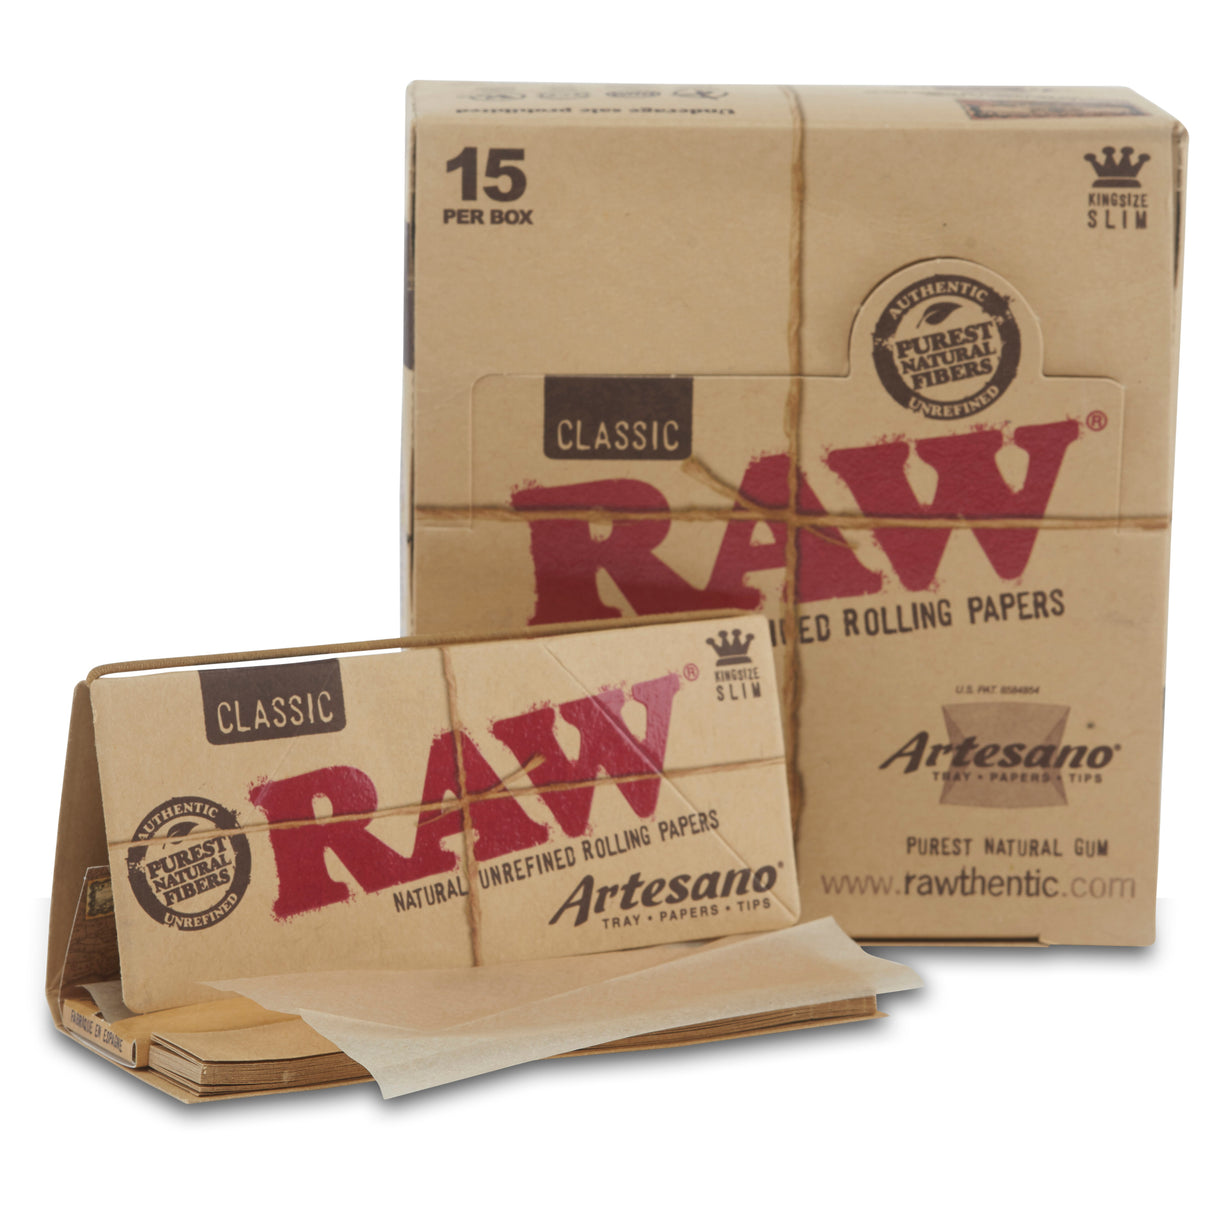 Raw Artesano Rolling Papers